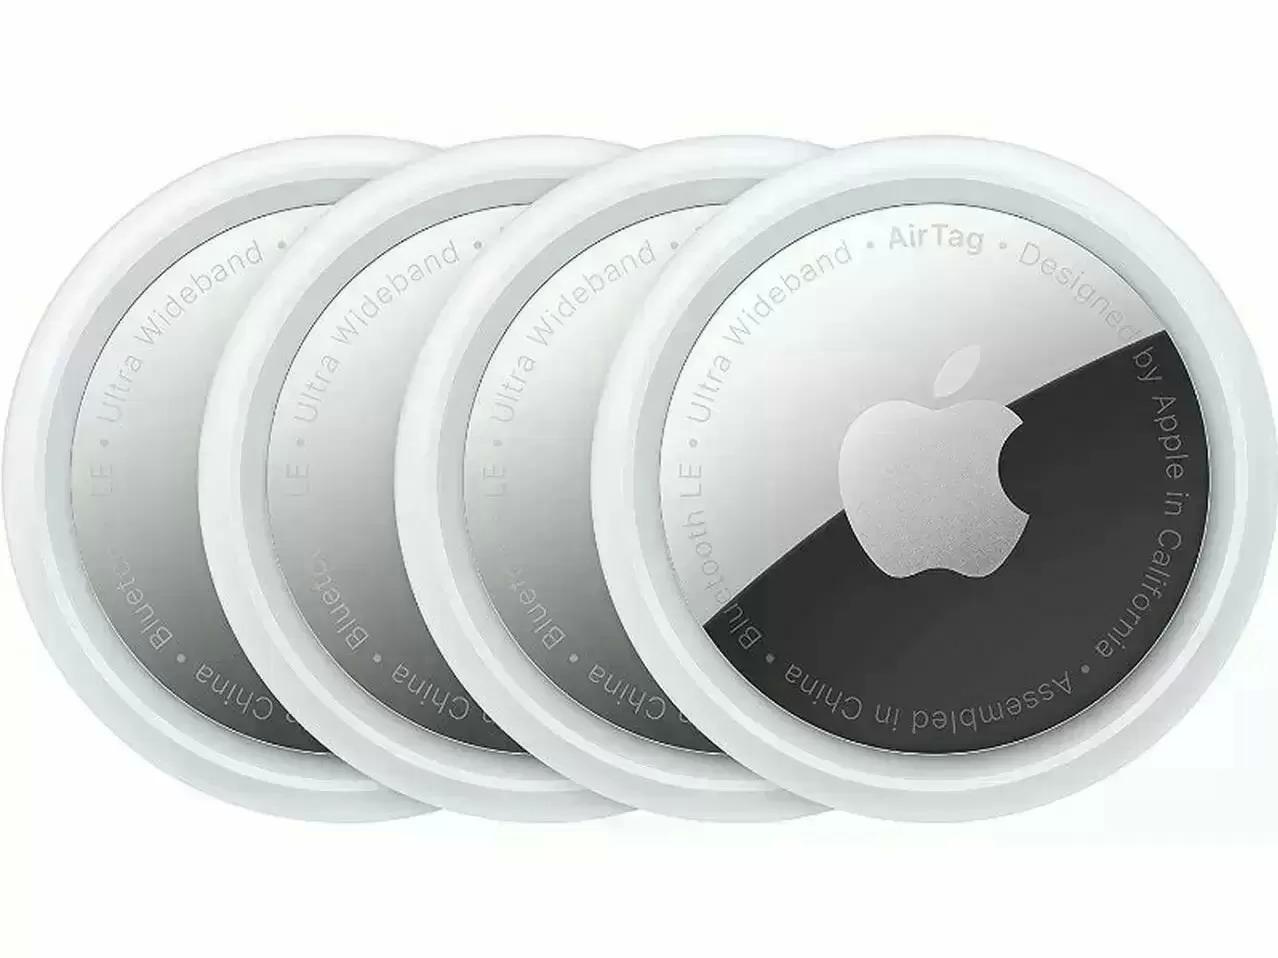 4 Apple AirTags + $25 Gift Card for $99 Shipped